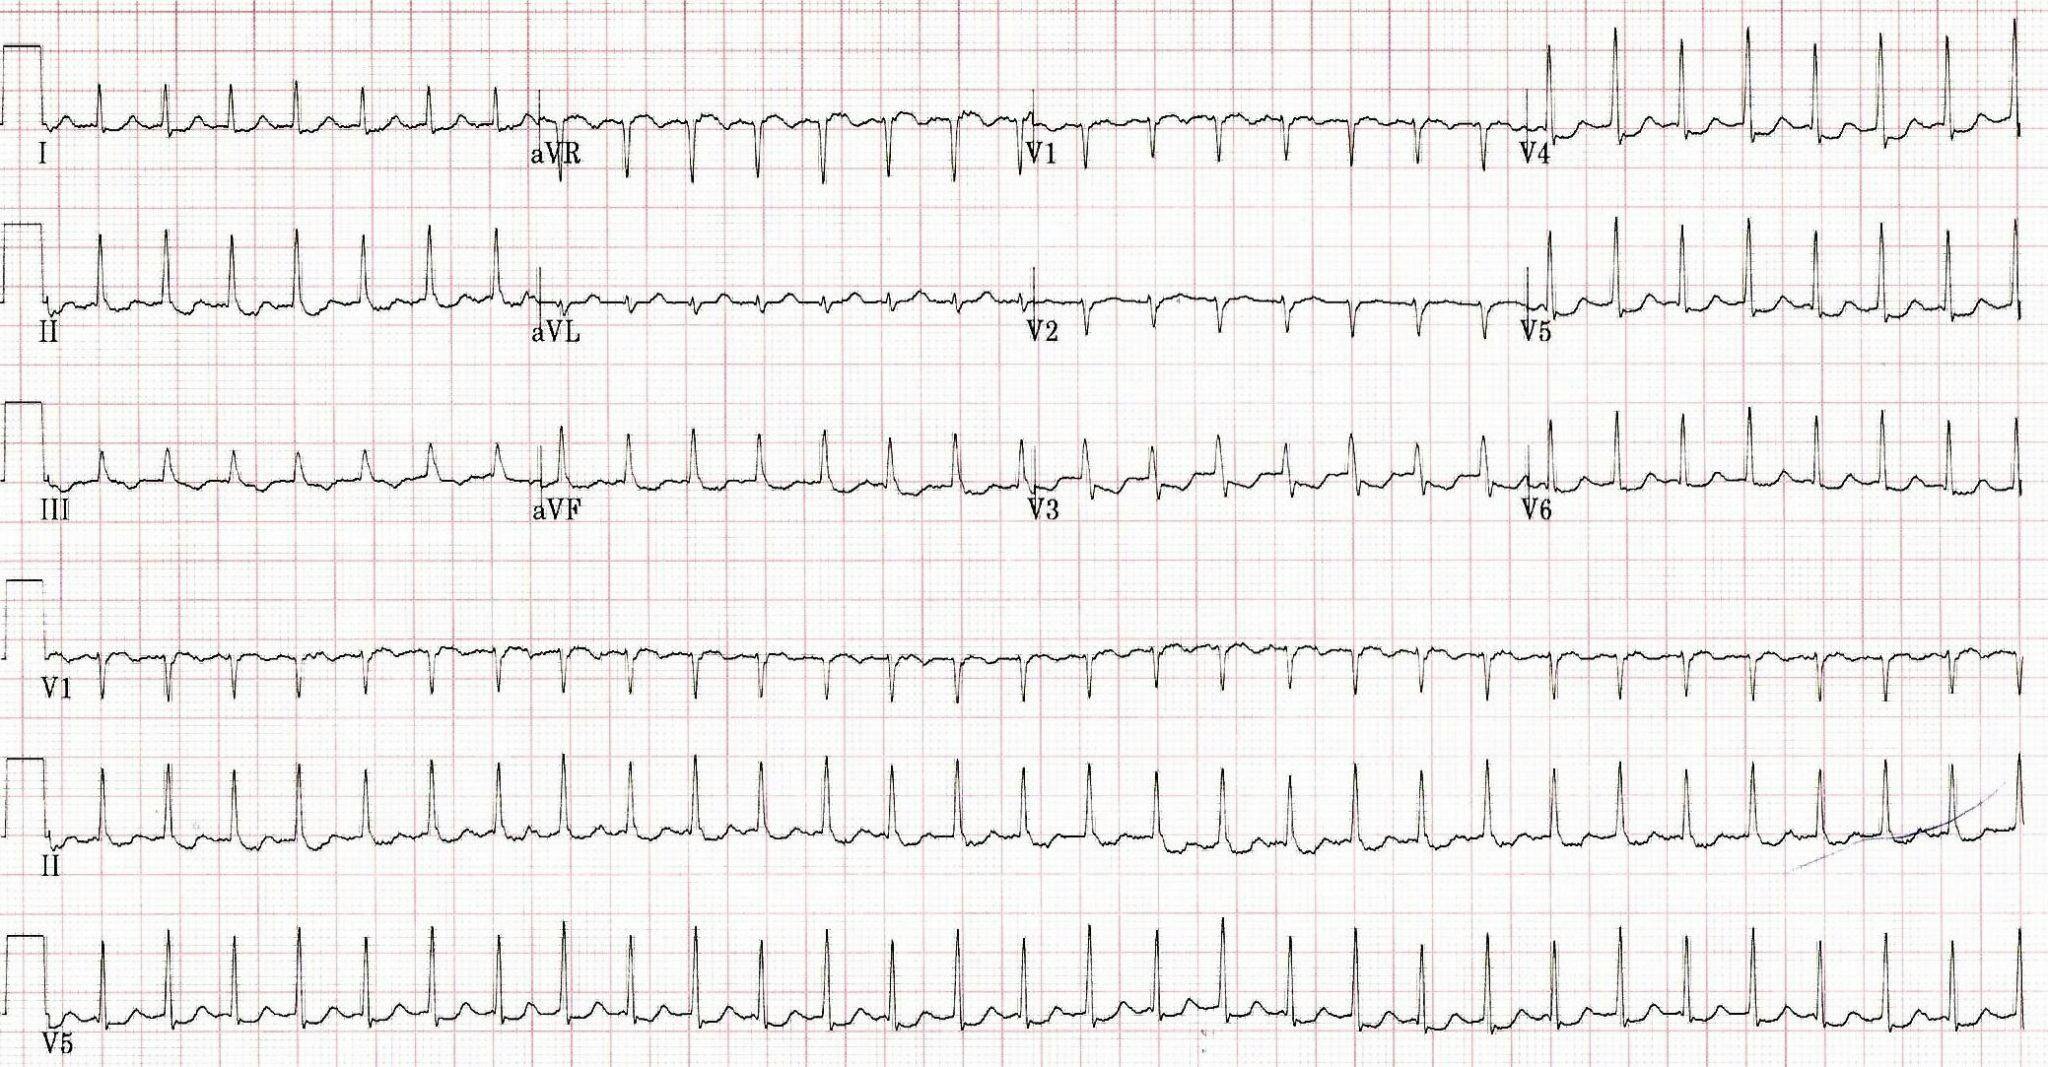 ECG printout of a patient with chest pain. Computer Read: Sinus tach at 179, ST & T wave abnormality, consider inferior ischemia. | Credit: Brady Pregerson, MD